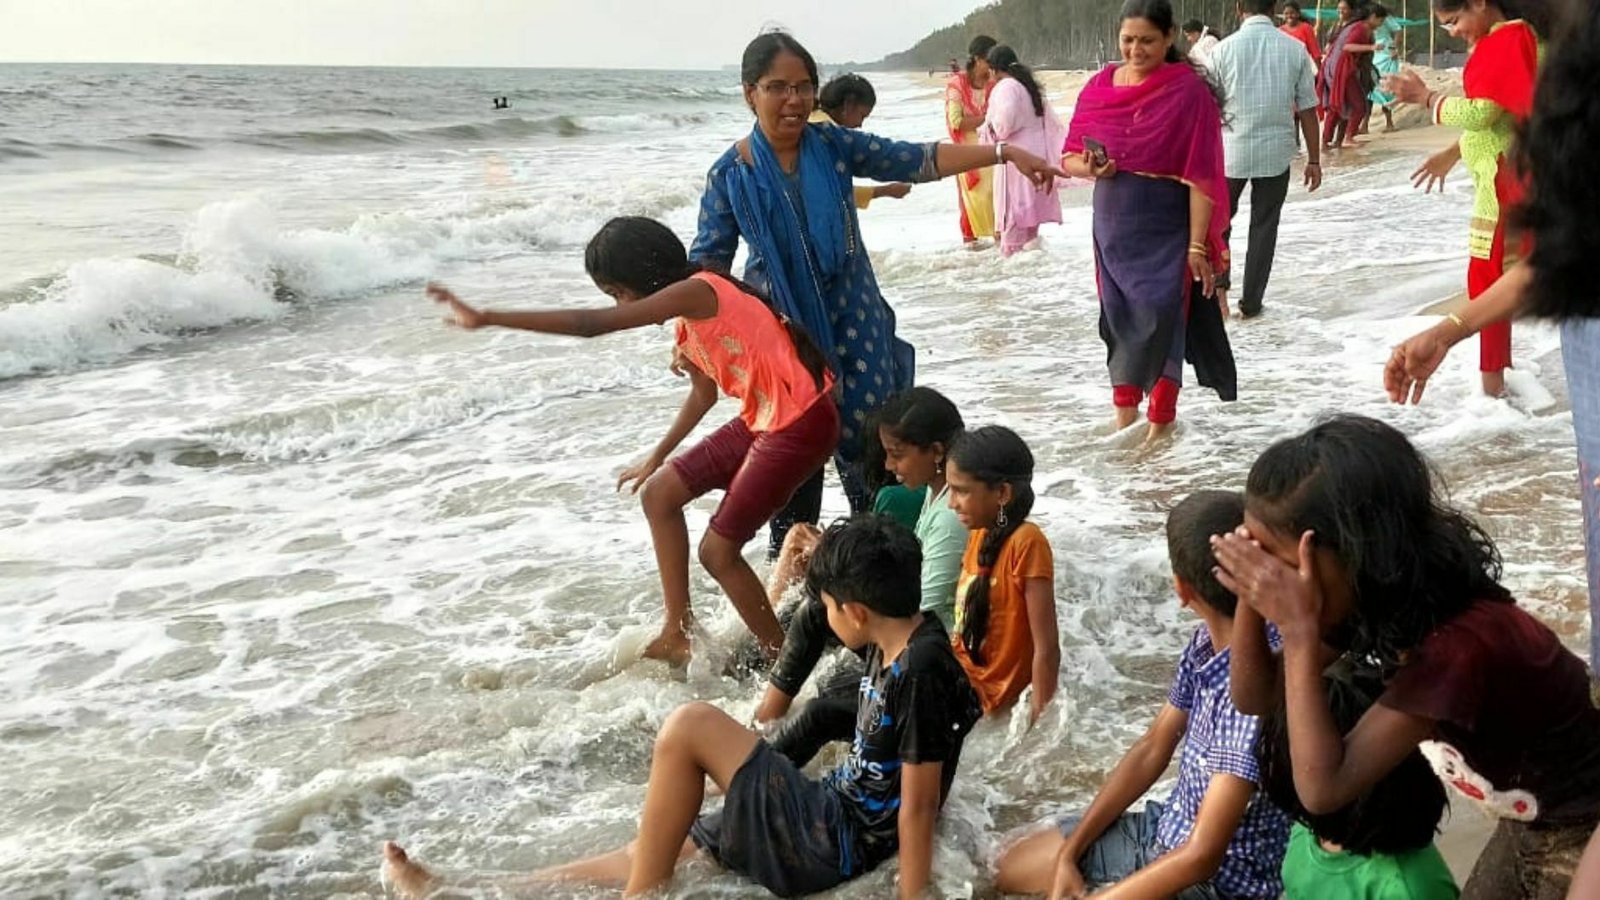 Students of Eloor Govt LP School in Kochi enjoying their surprise day out with teachers.